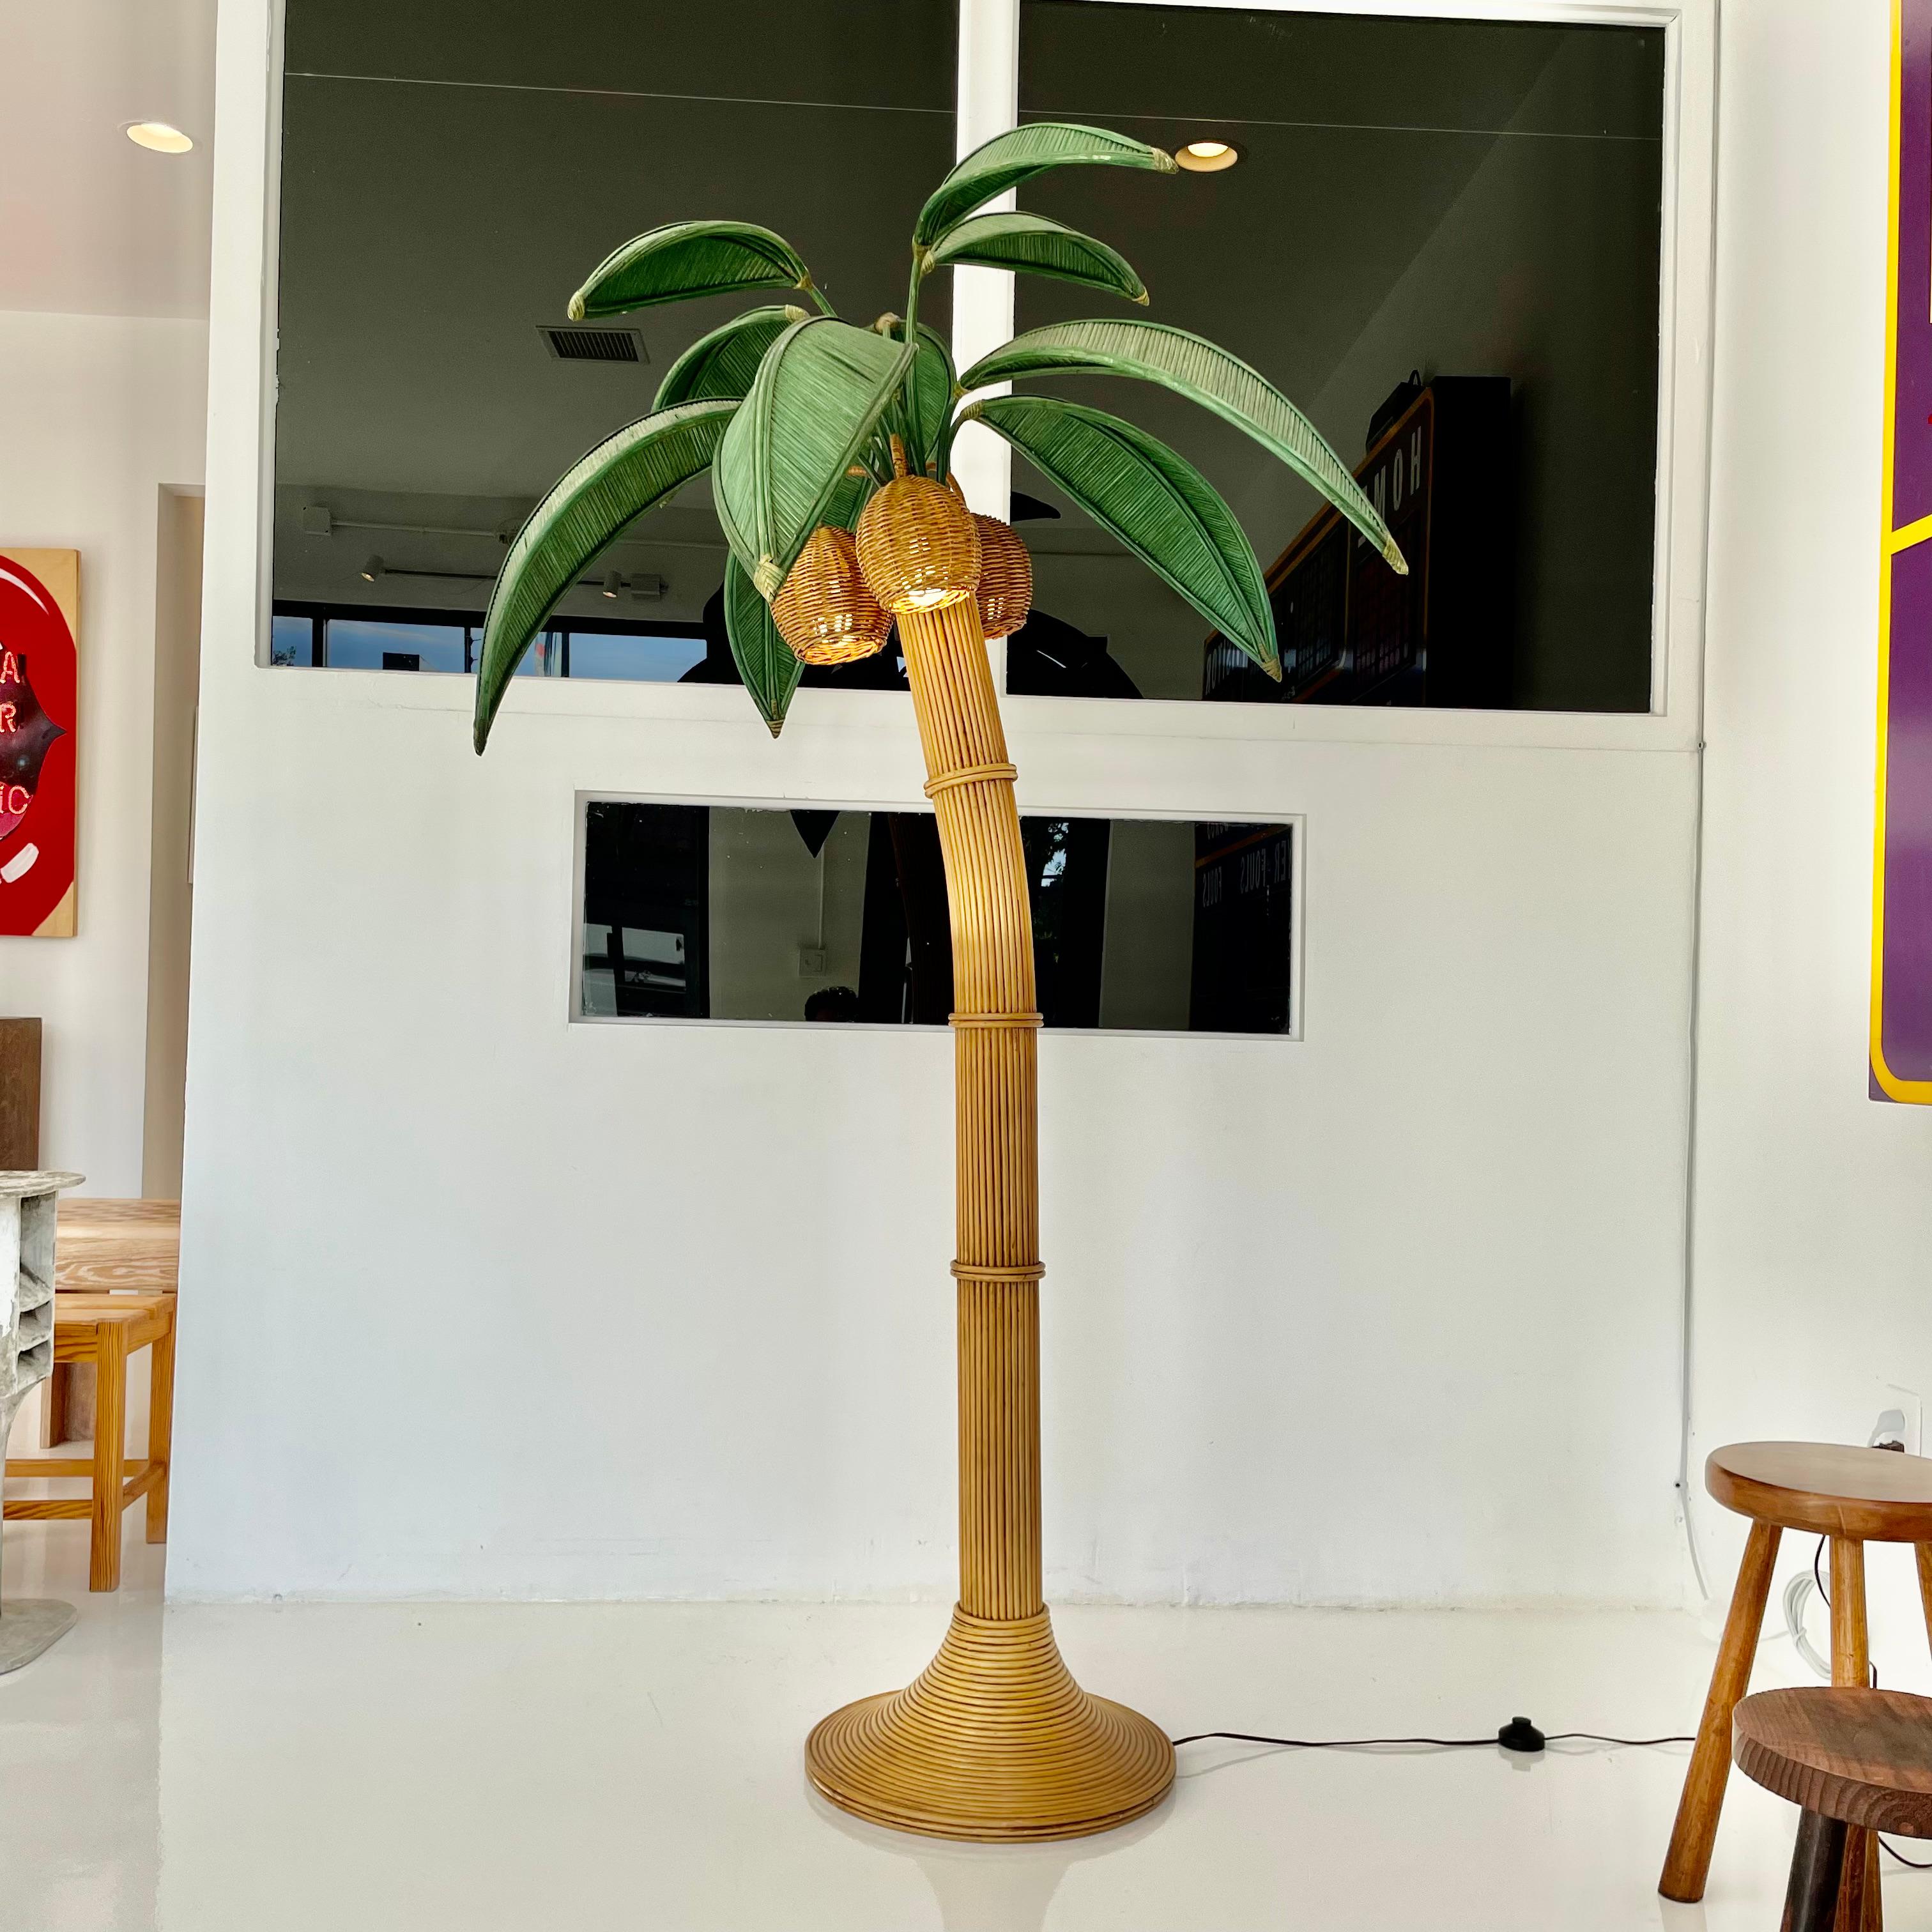 Beachy floor lamp of a Palm tree. Just under 7 feet tall. Made of rattan and wicker. Three wicker coconuts each contain a socket/light inside. Coconuts swivel. Green palm leaves made of wicker and rattan sprout out for the top. They rotate 180